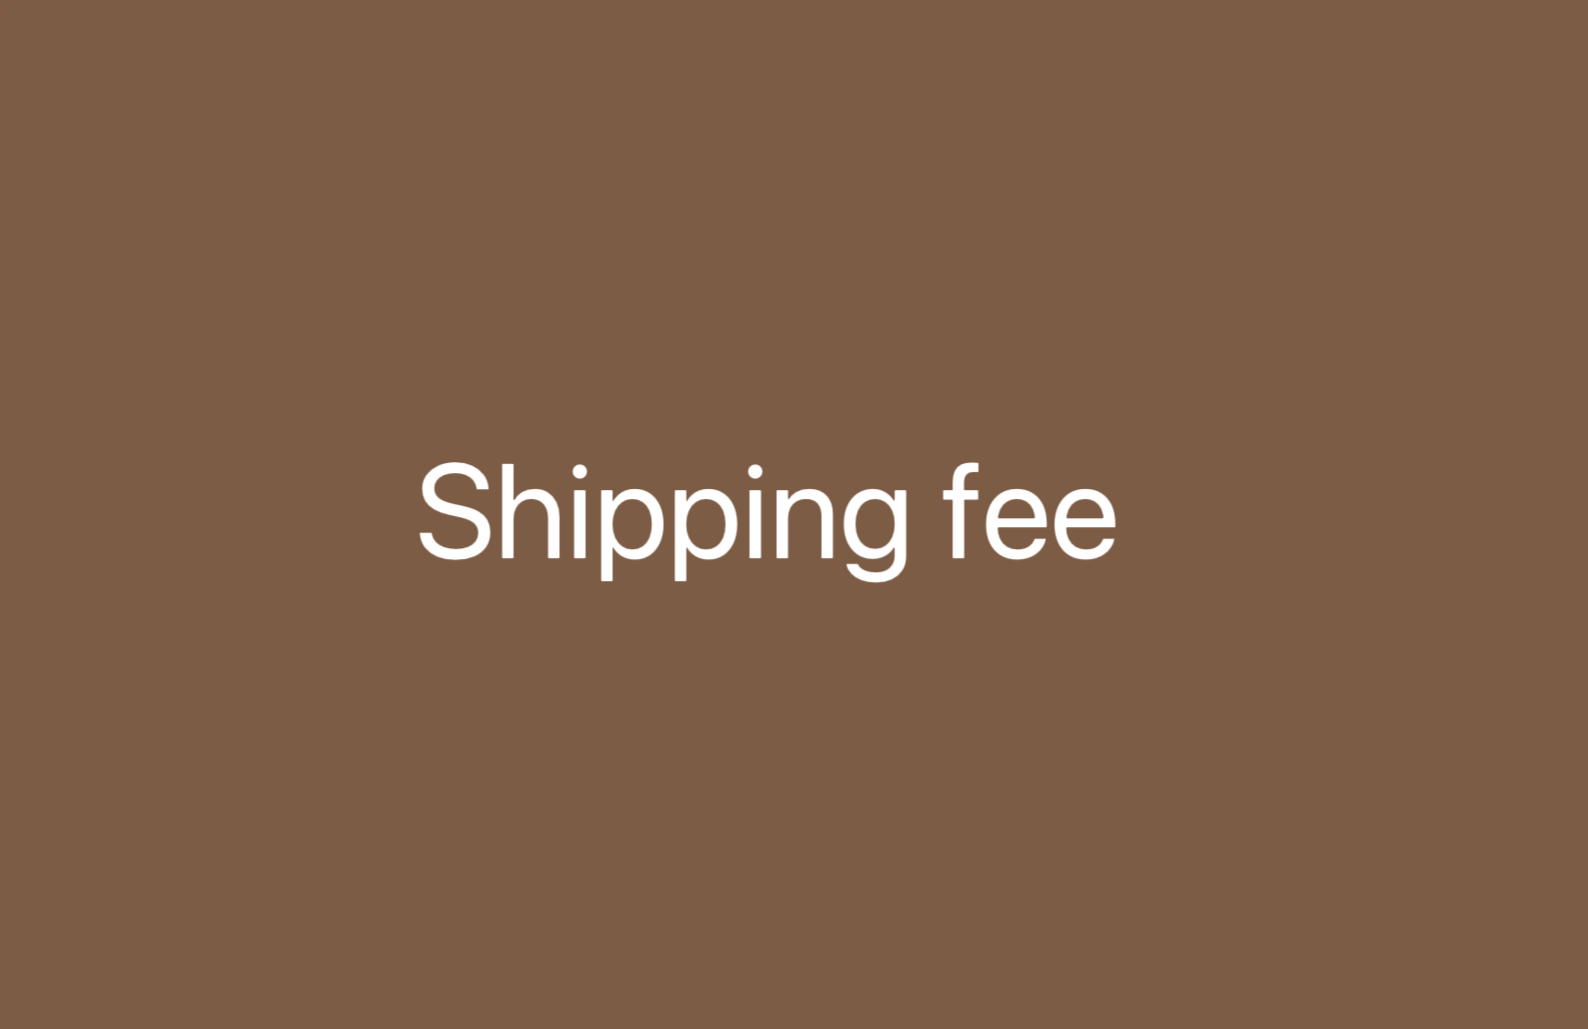 Shipping fee for fast/remote area